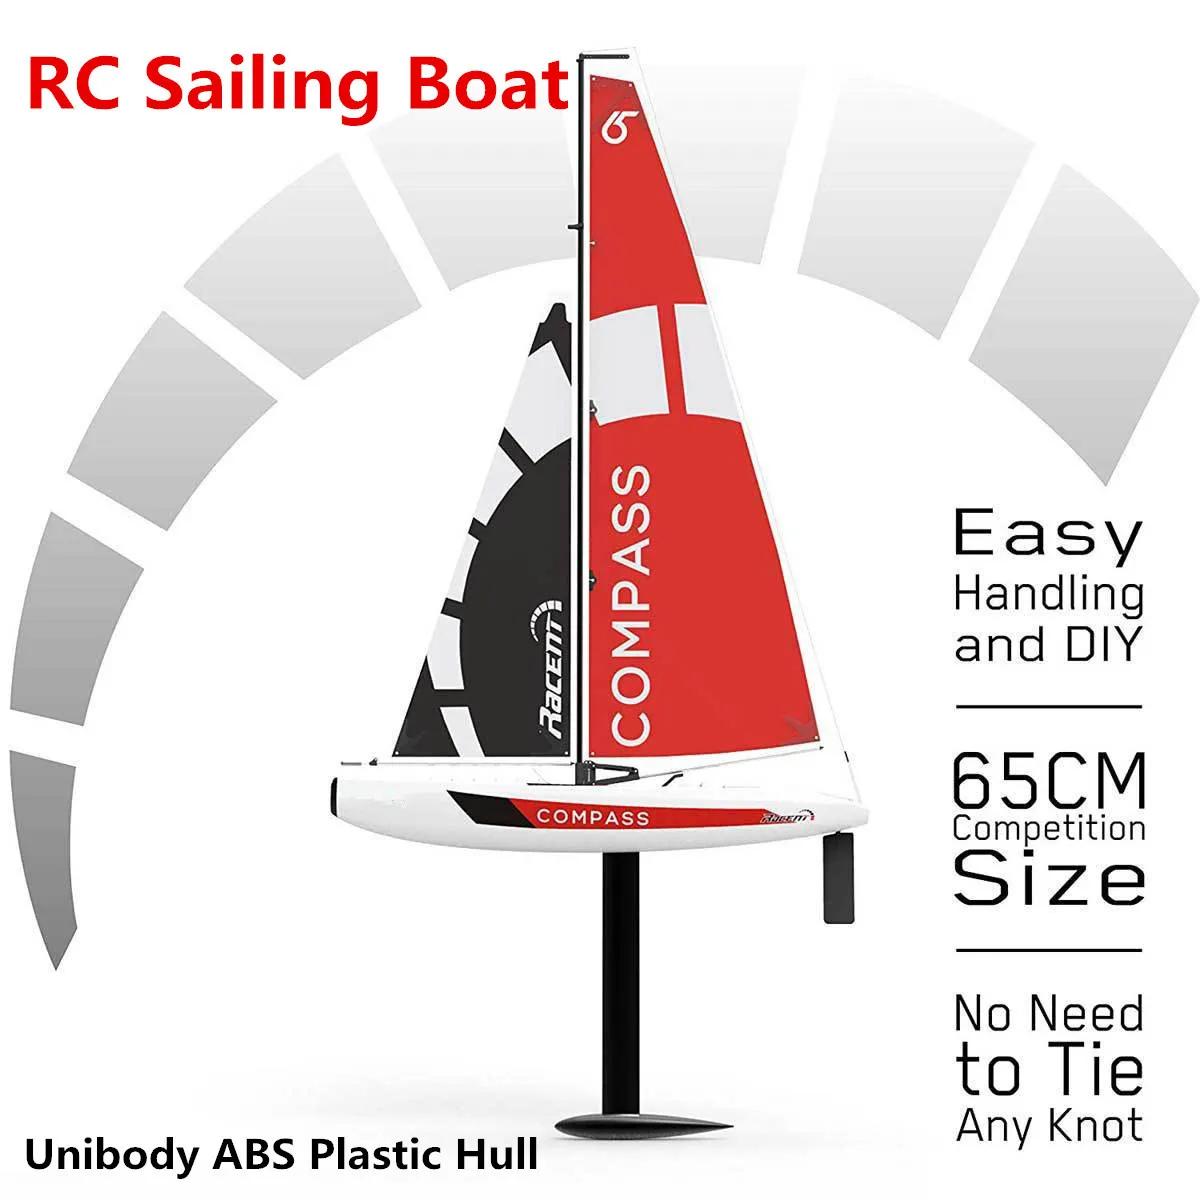 Rc Sailing Shop: Services and products for all levels of RC sailing enthusiasts.